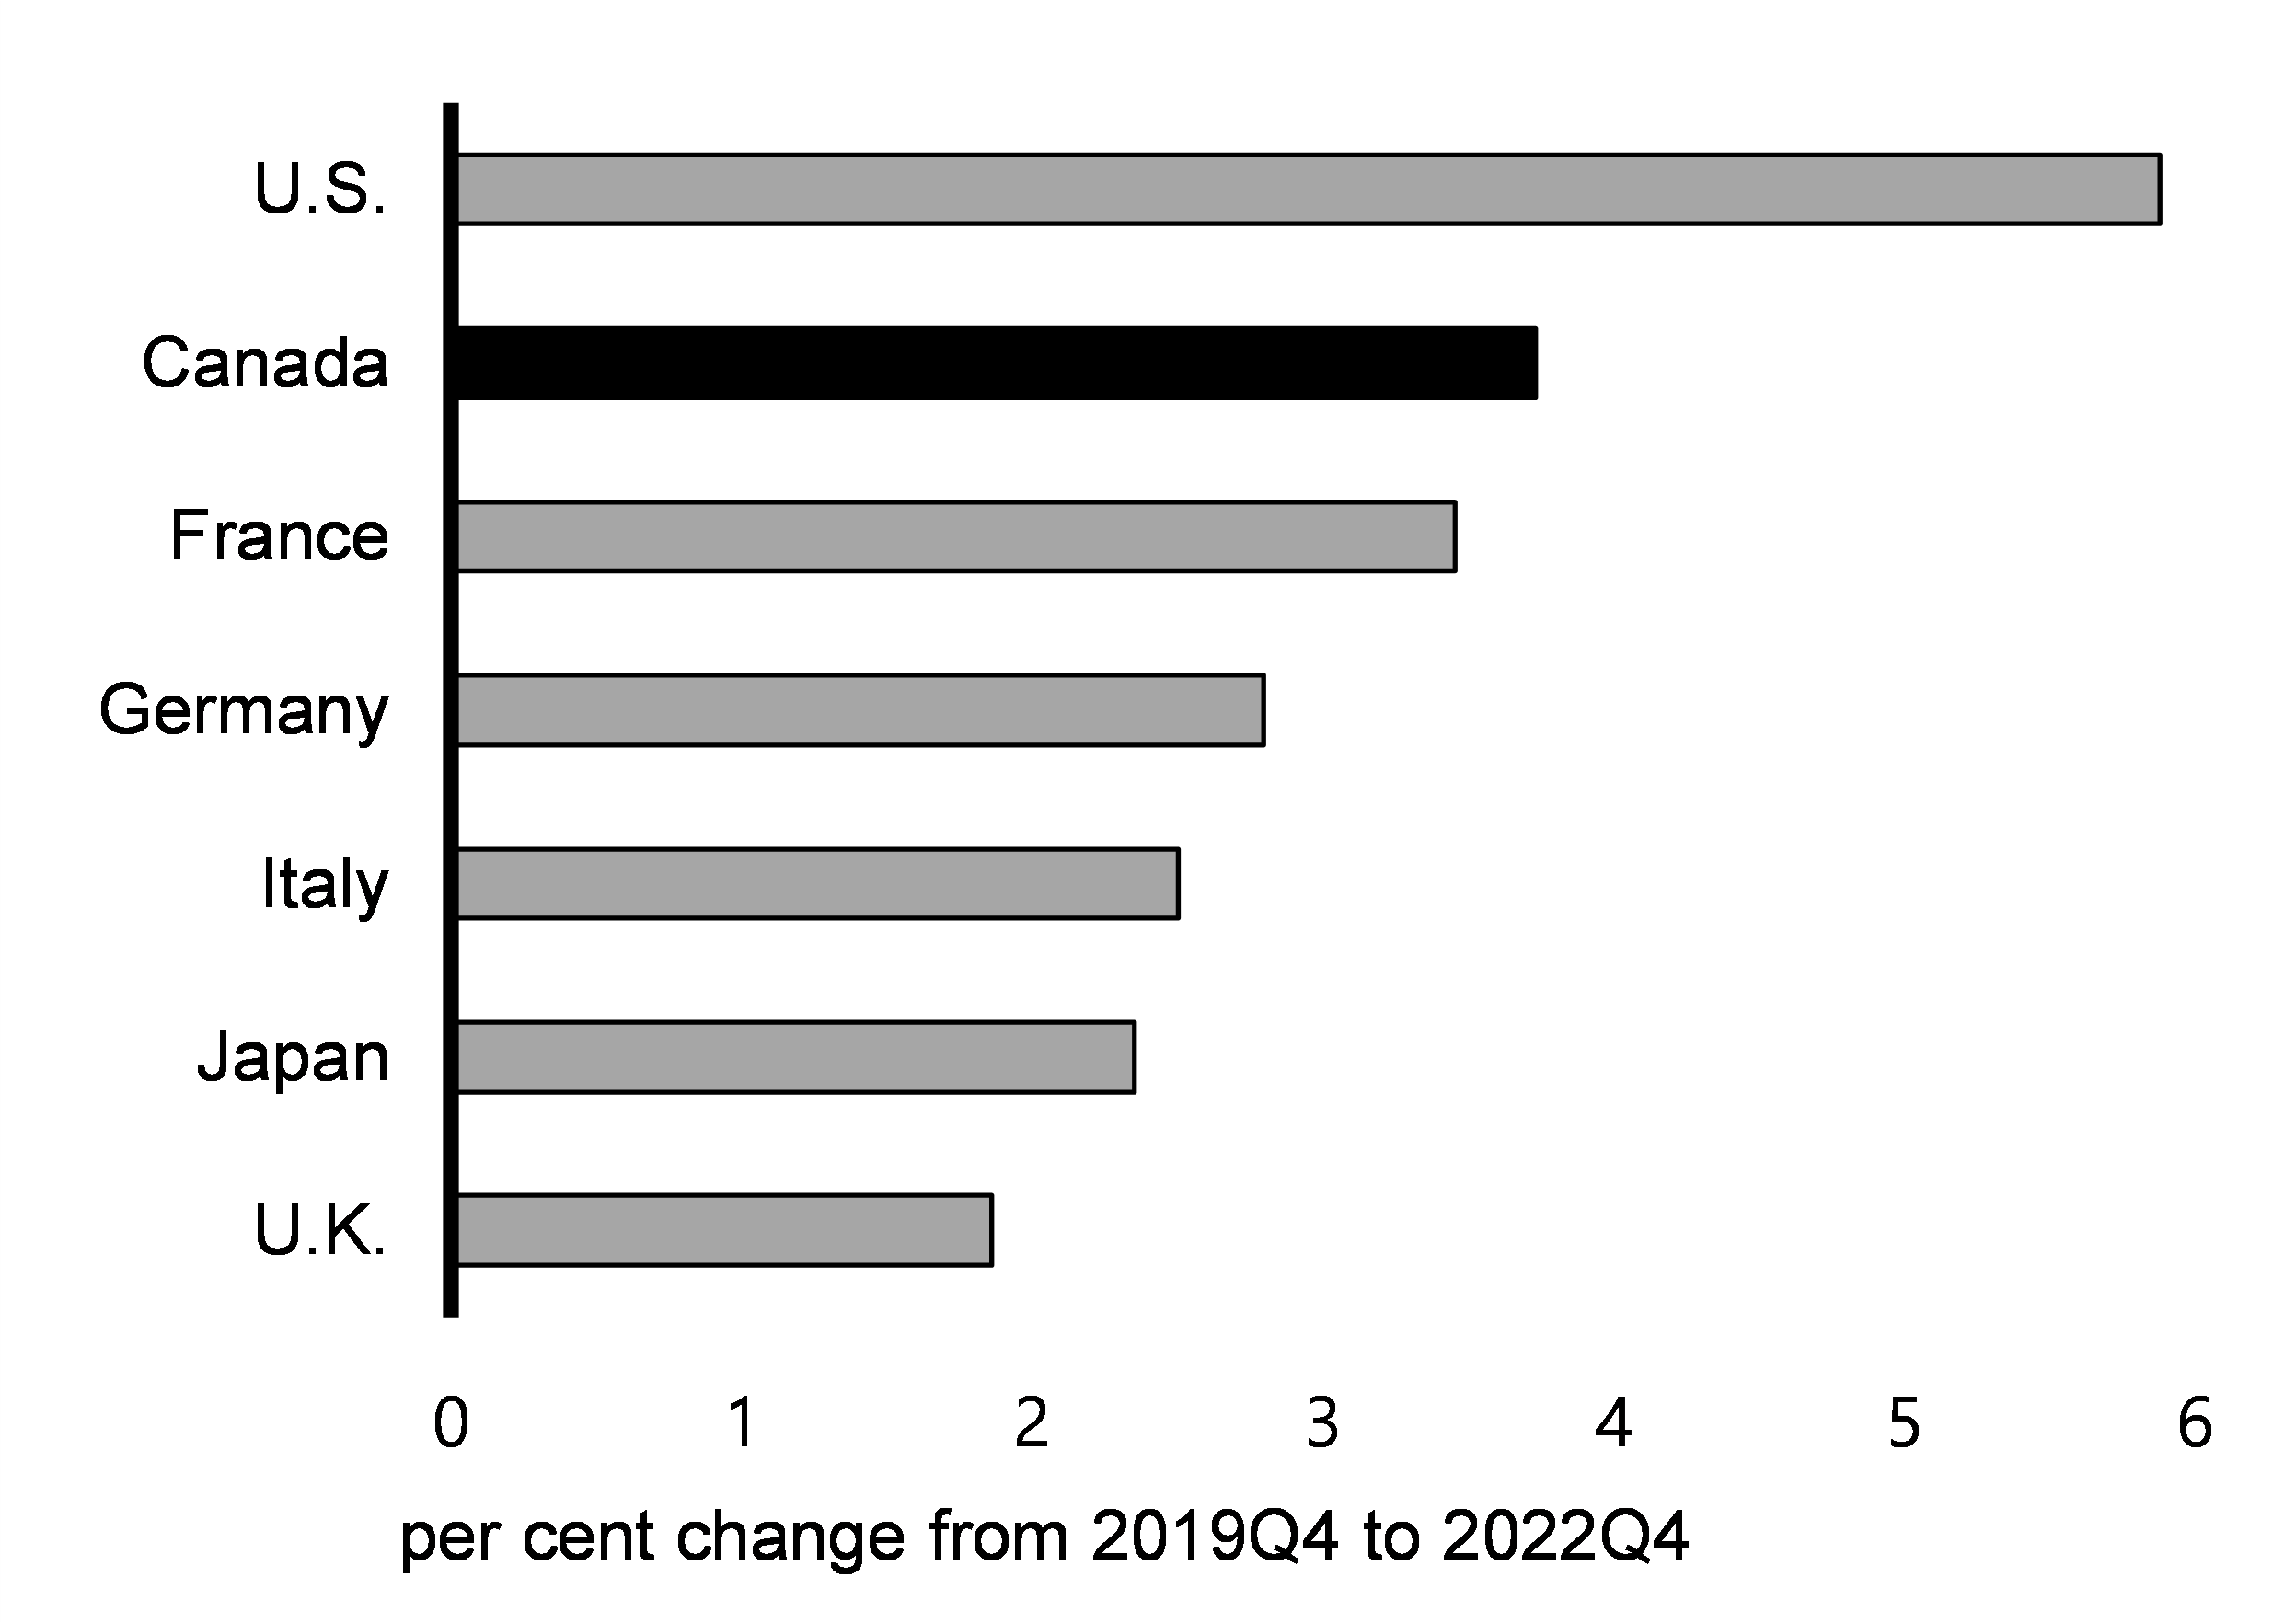 Chart 2.27: Projected Change in Real GDP by 2022Q4